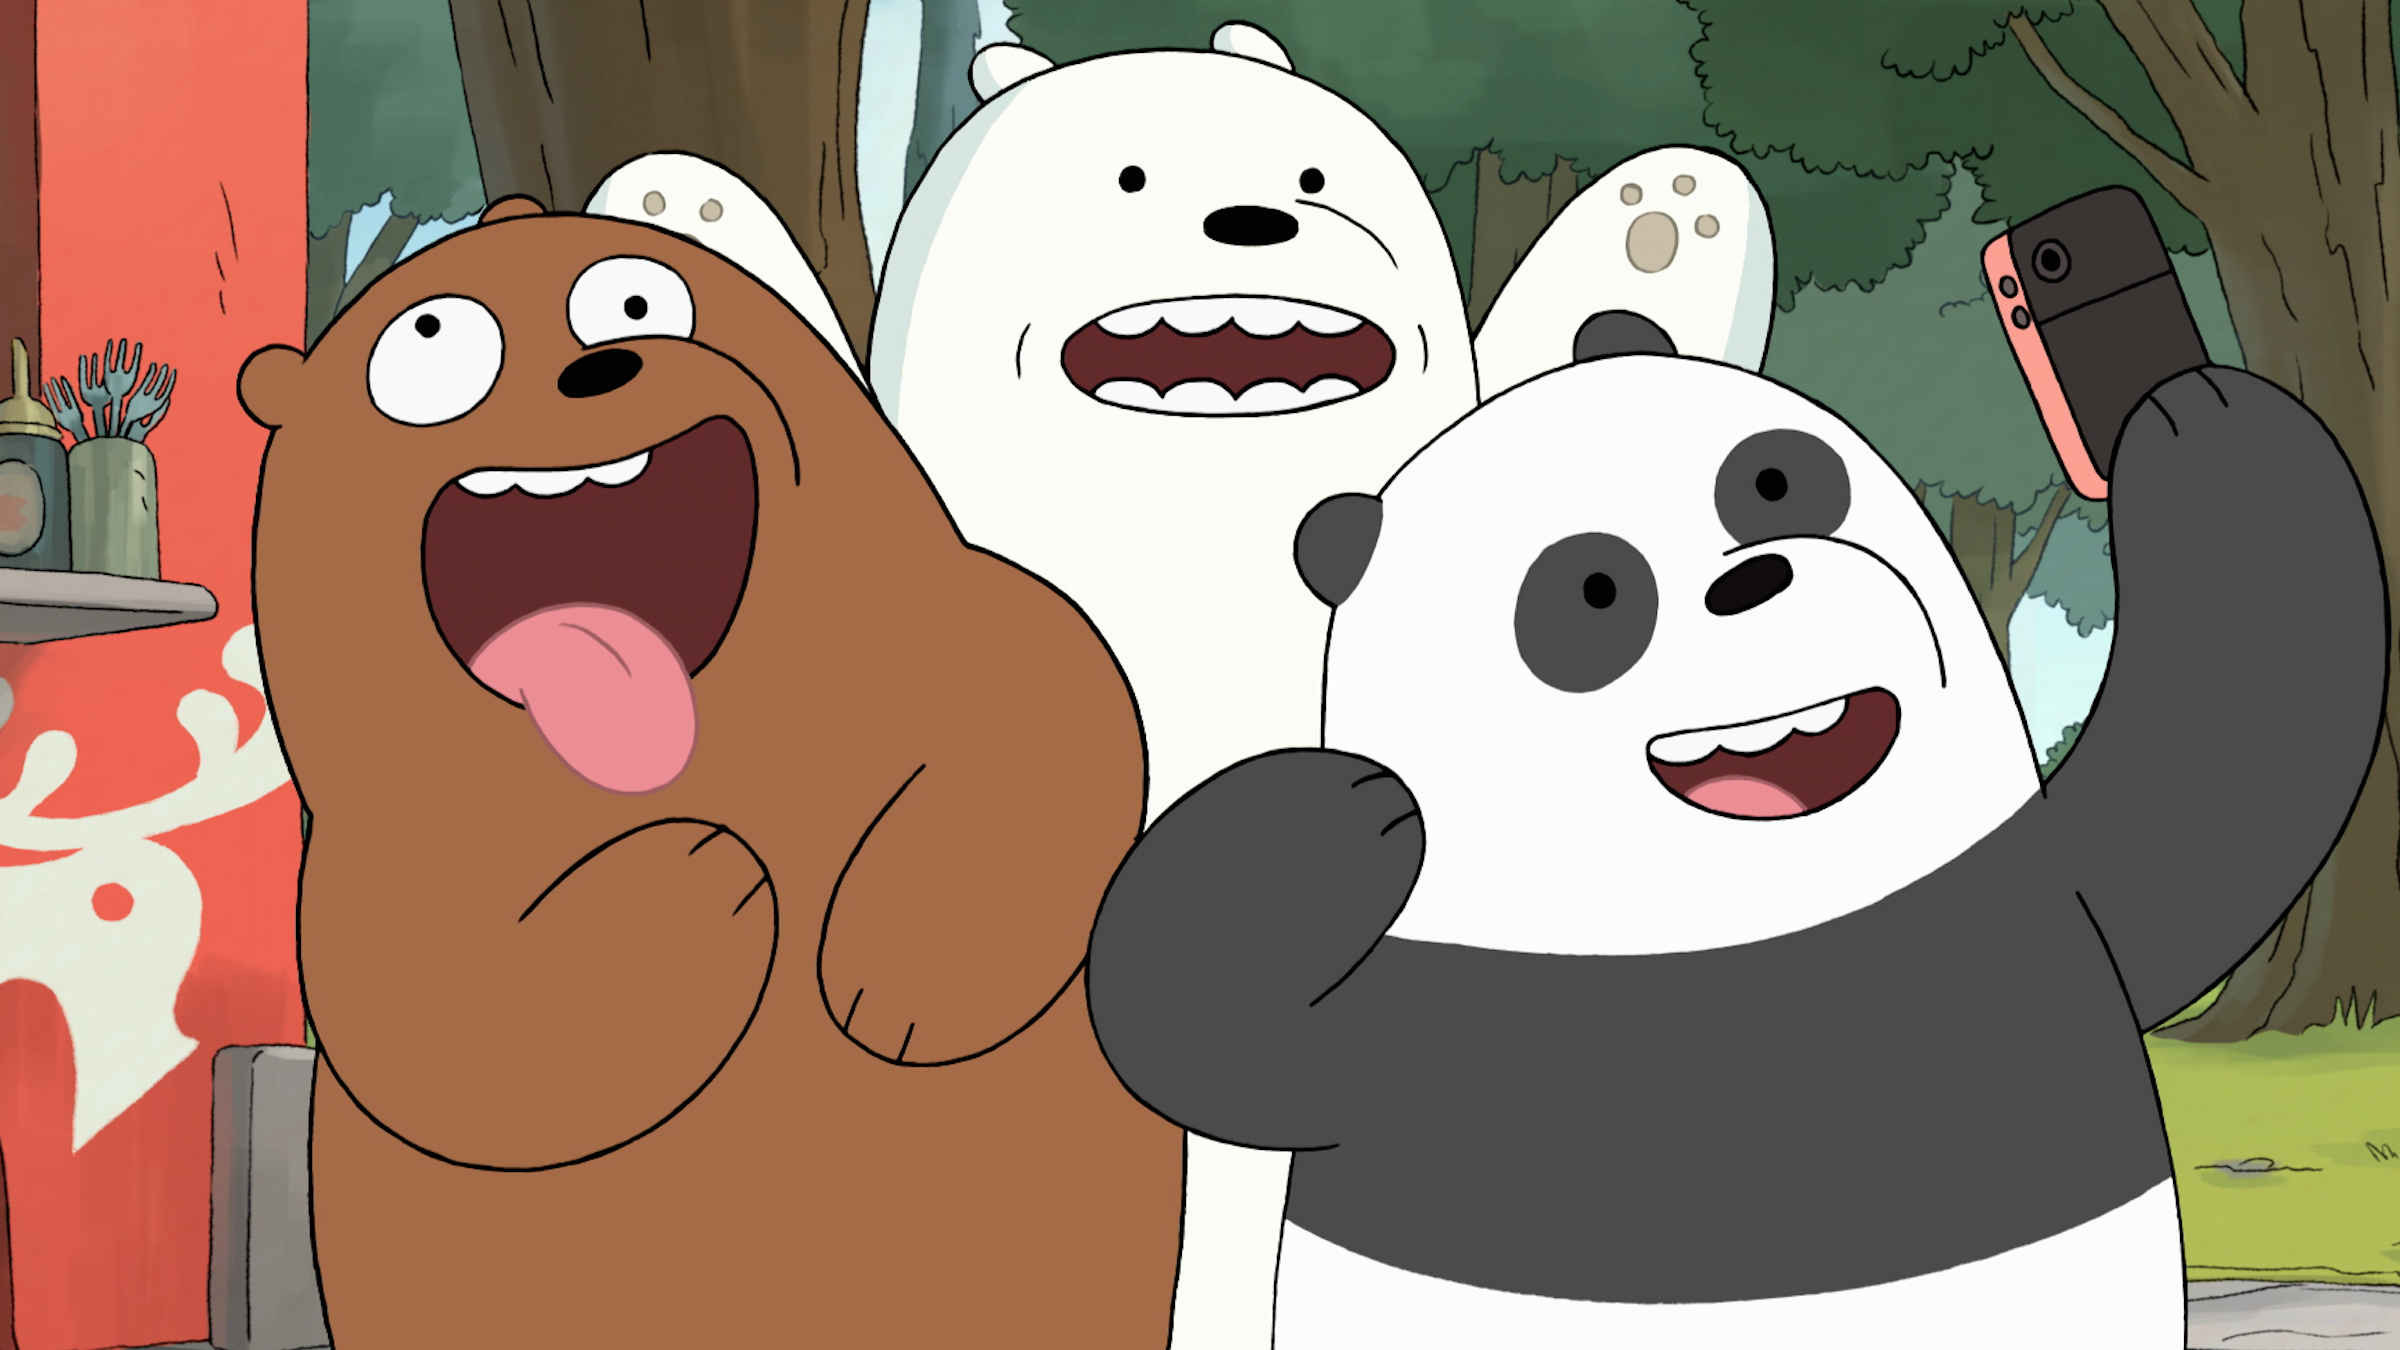 We Bare Bears The Movie Reminds Us Of The Series' True Message - Den of Geek